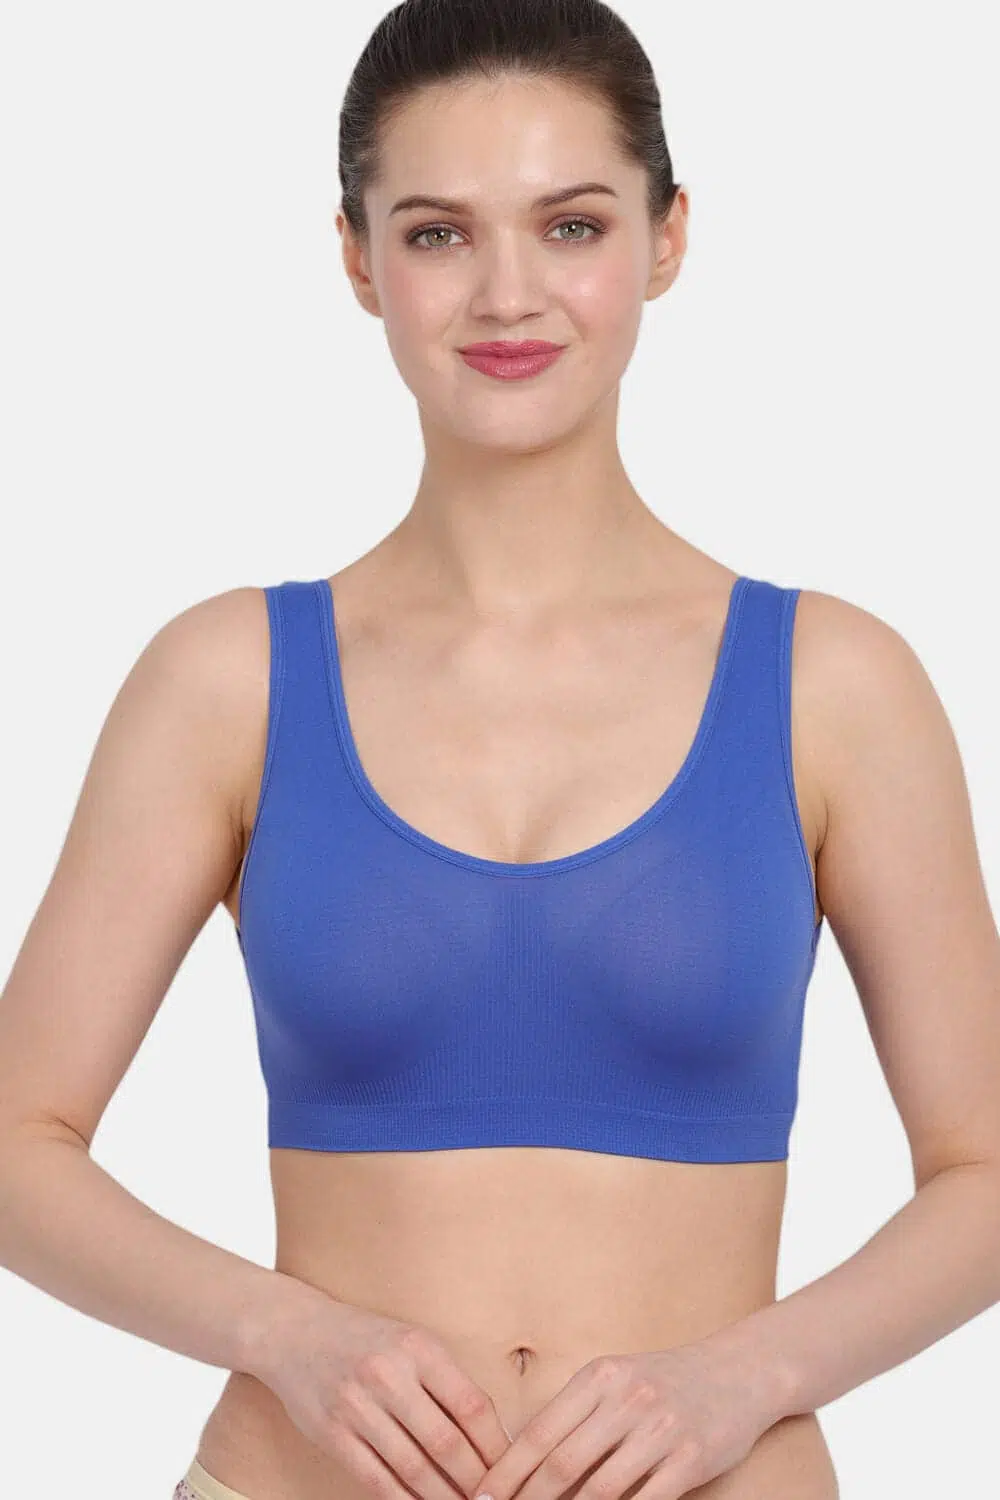 ANAND INDIA Seamless Air Bra For Women - Stretchable Non-Padded